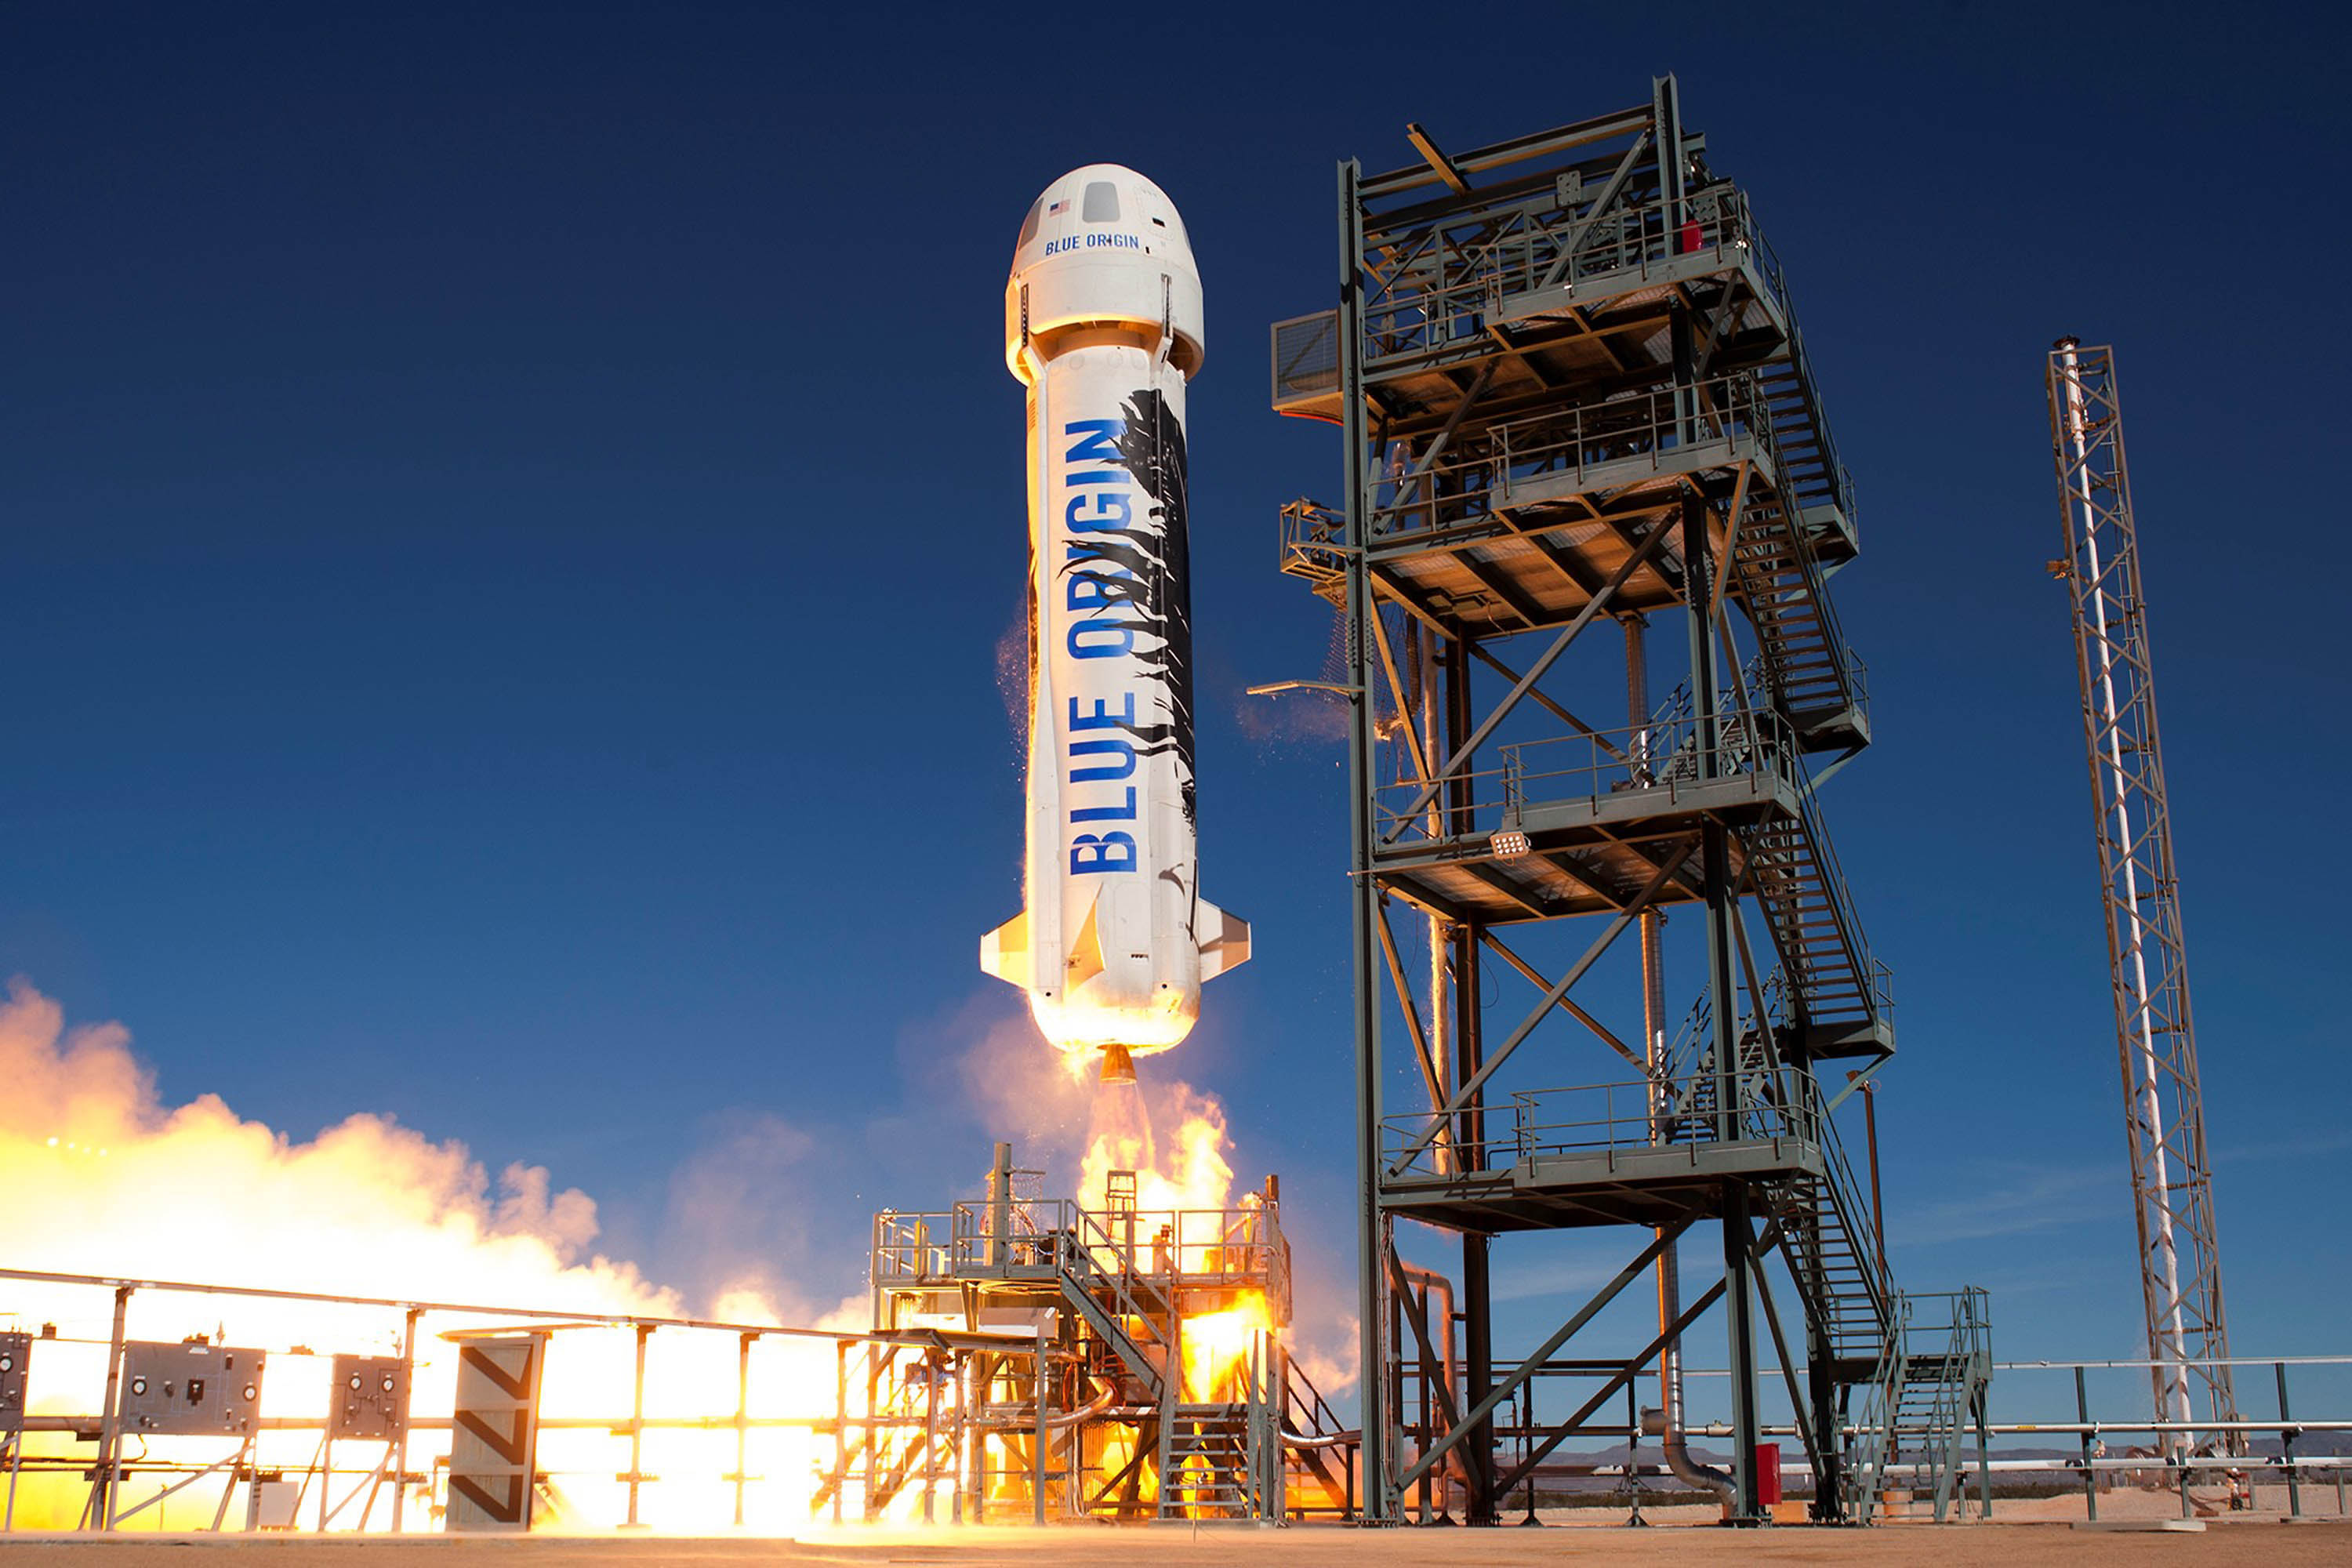 Commercial spaceflights are allowing more people to travel into space. Blue Origin 